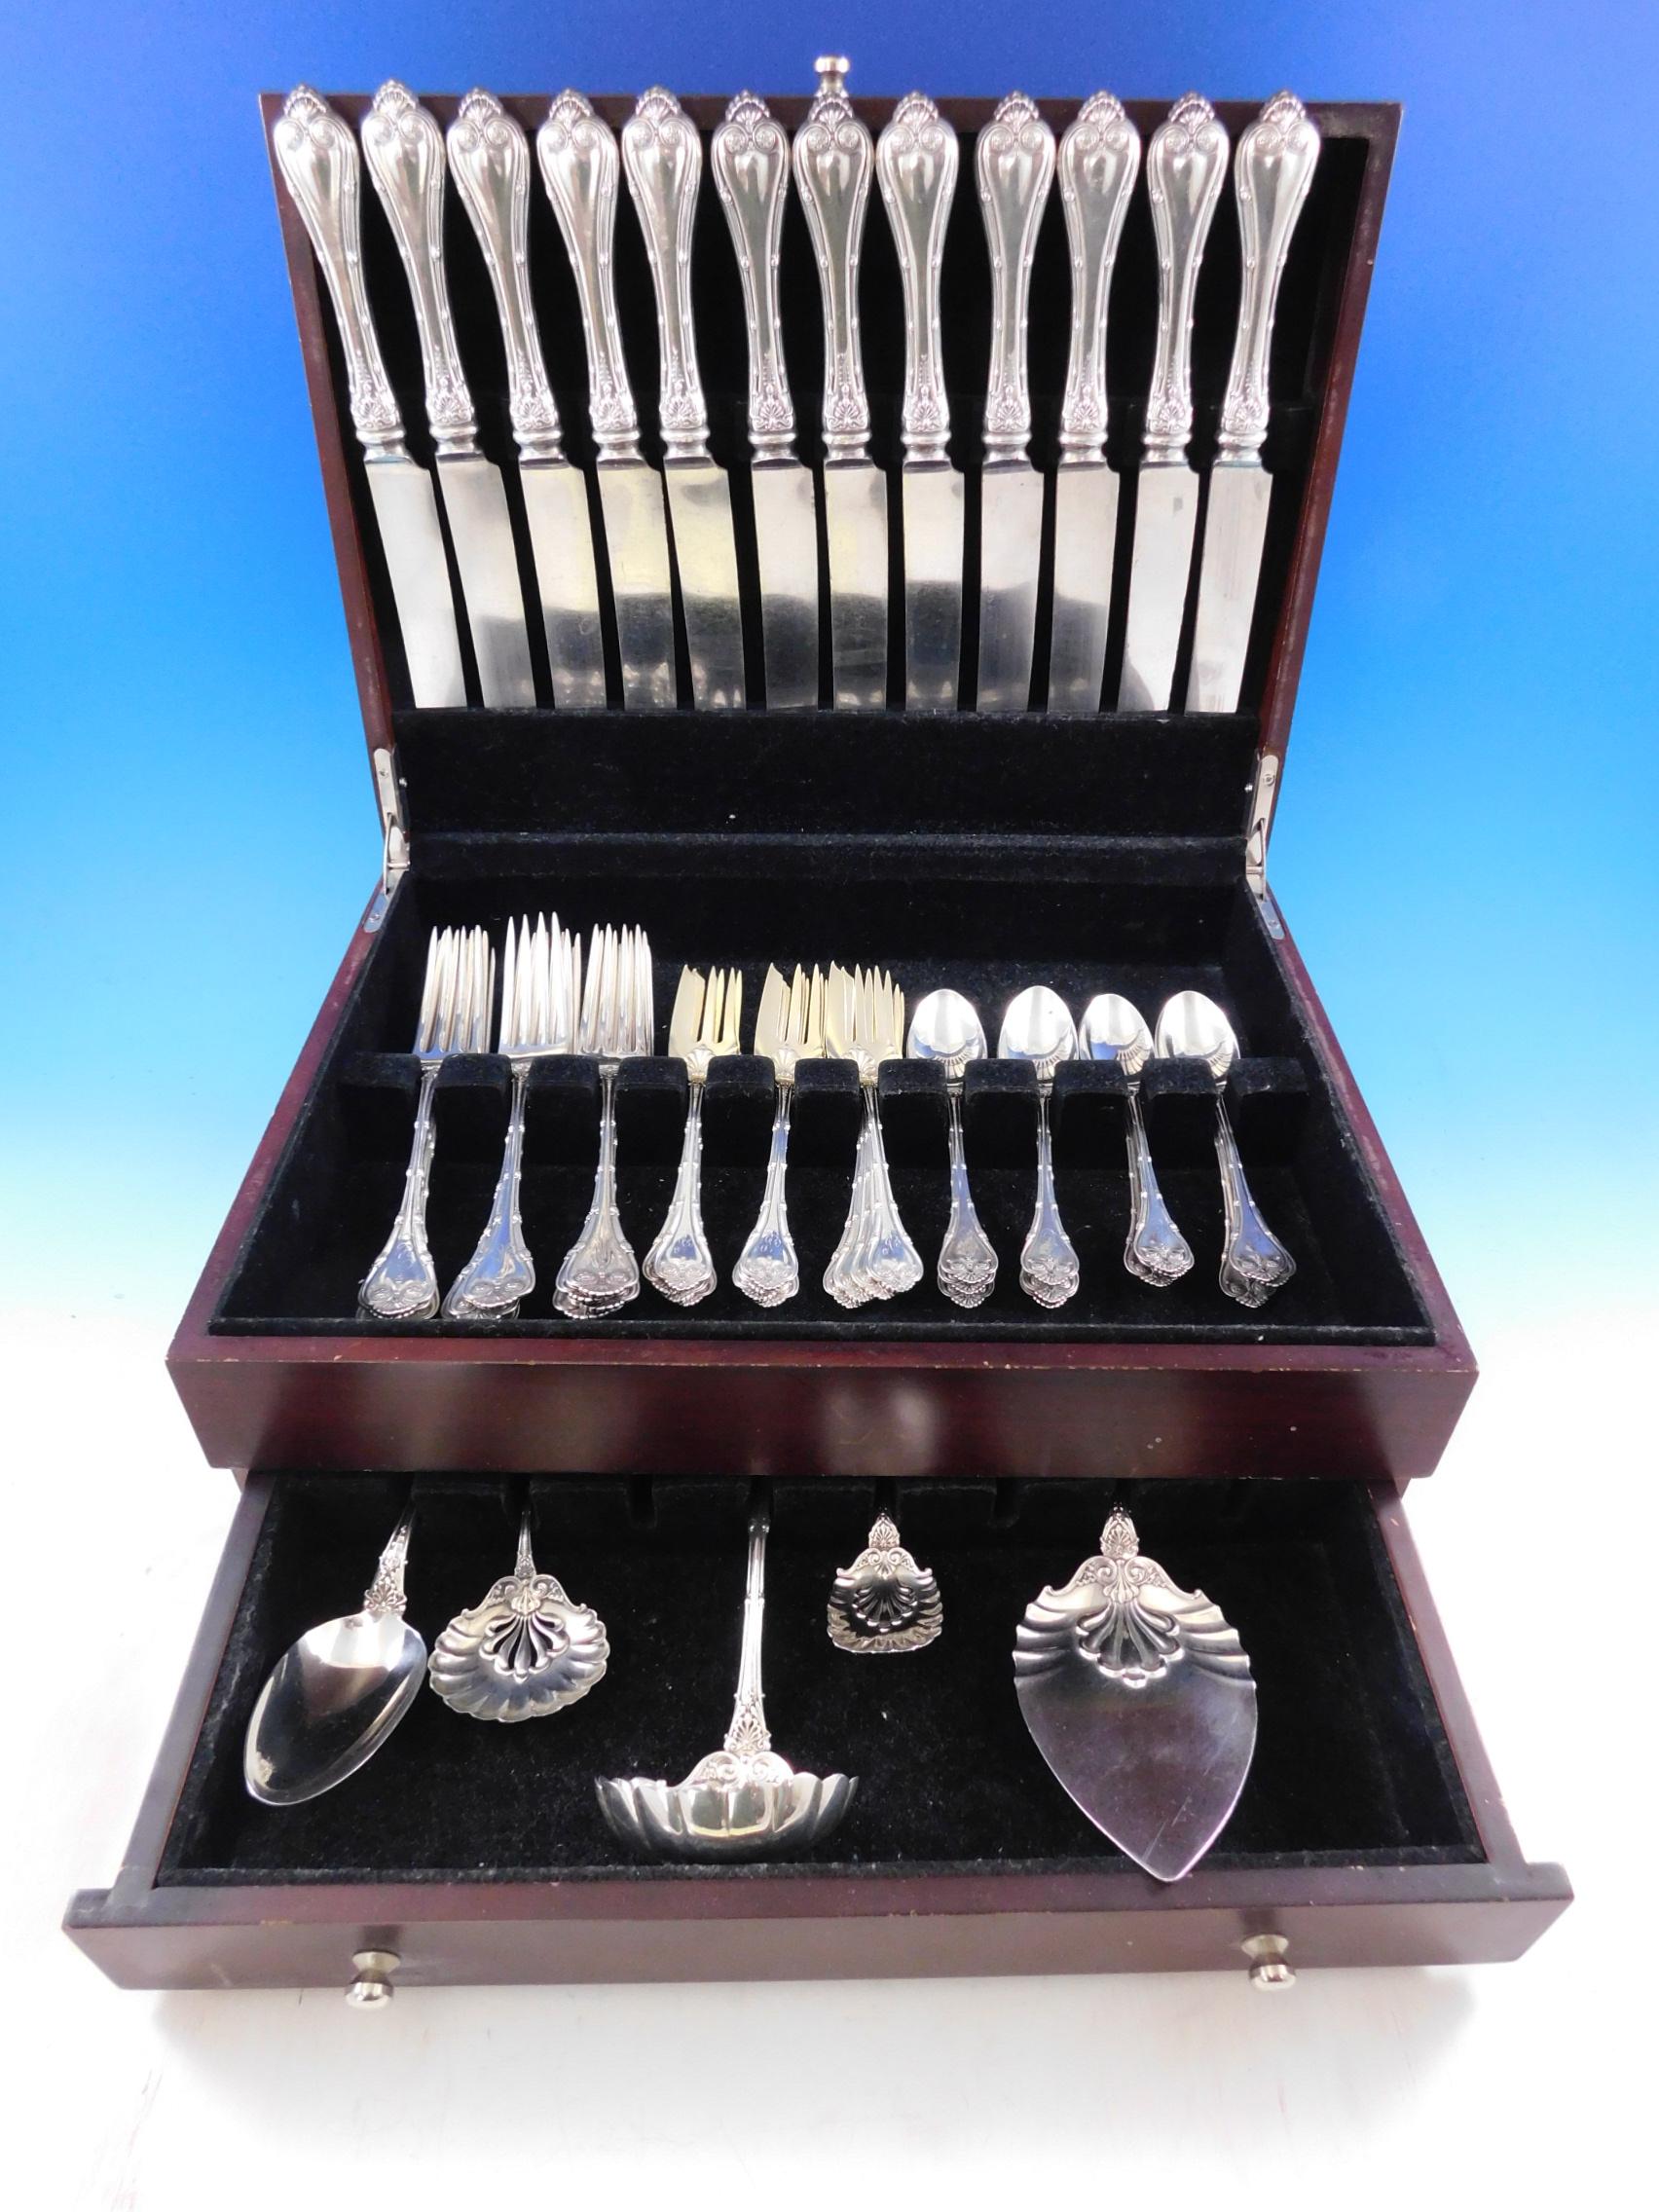 Early rare Empire by Whiting, circa 1892, sterling silver flatware set - 53 pieces. This set includes:

12 large banquet size knives, 10 5/8